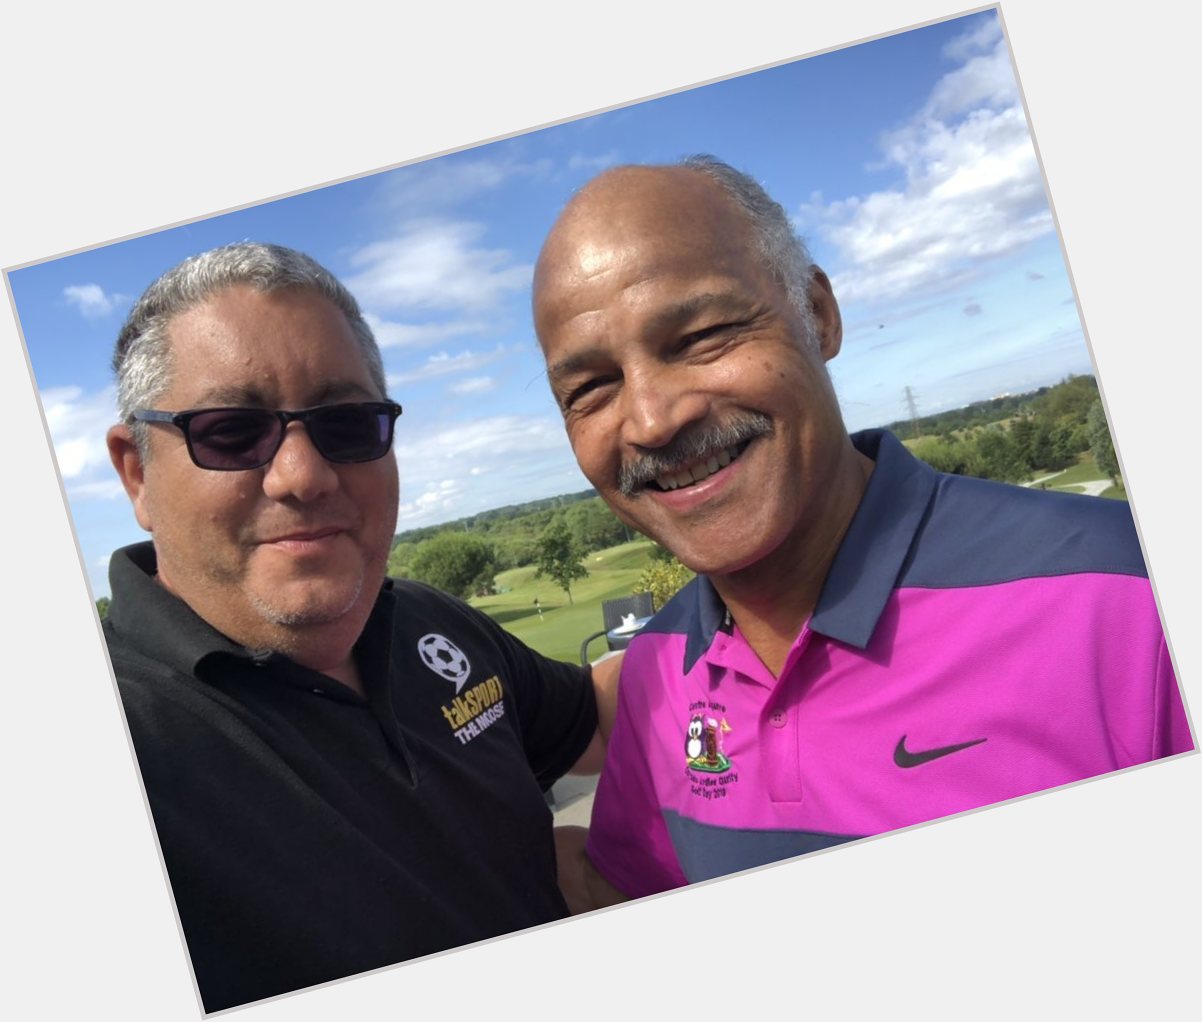 Happy 69th Birthday former light-heavyweight champion of the world, John Conteh, have a great day my friend 